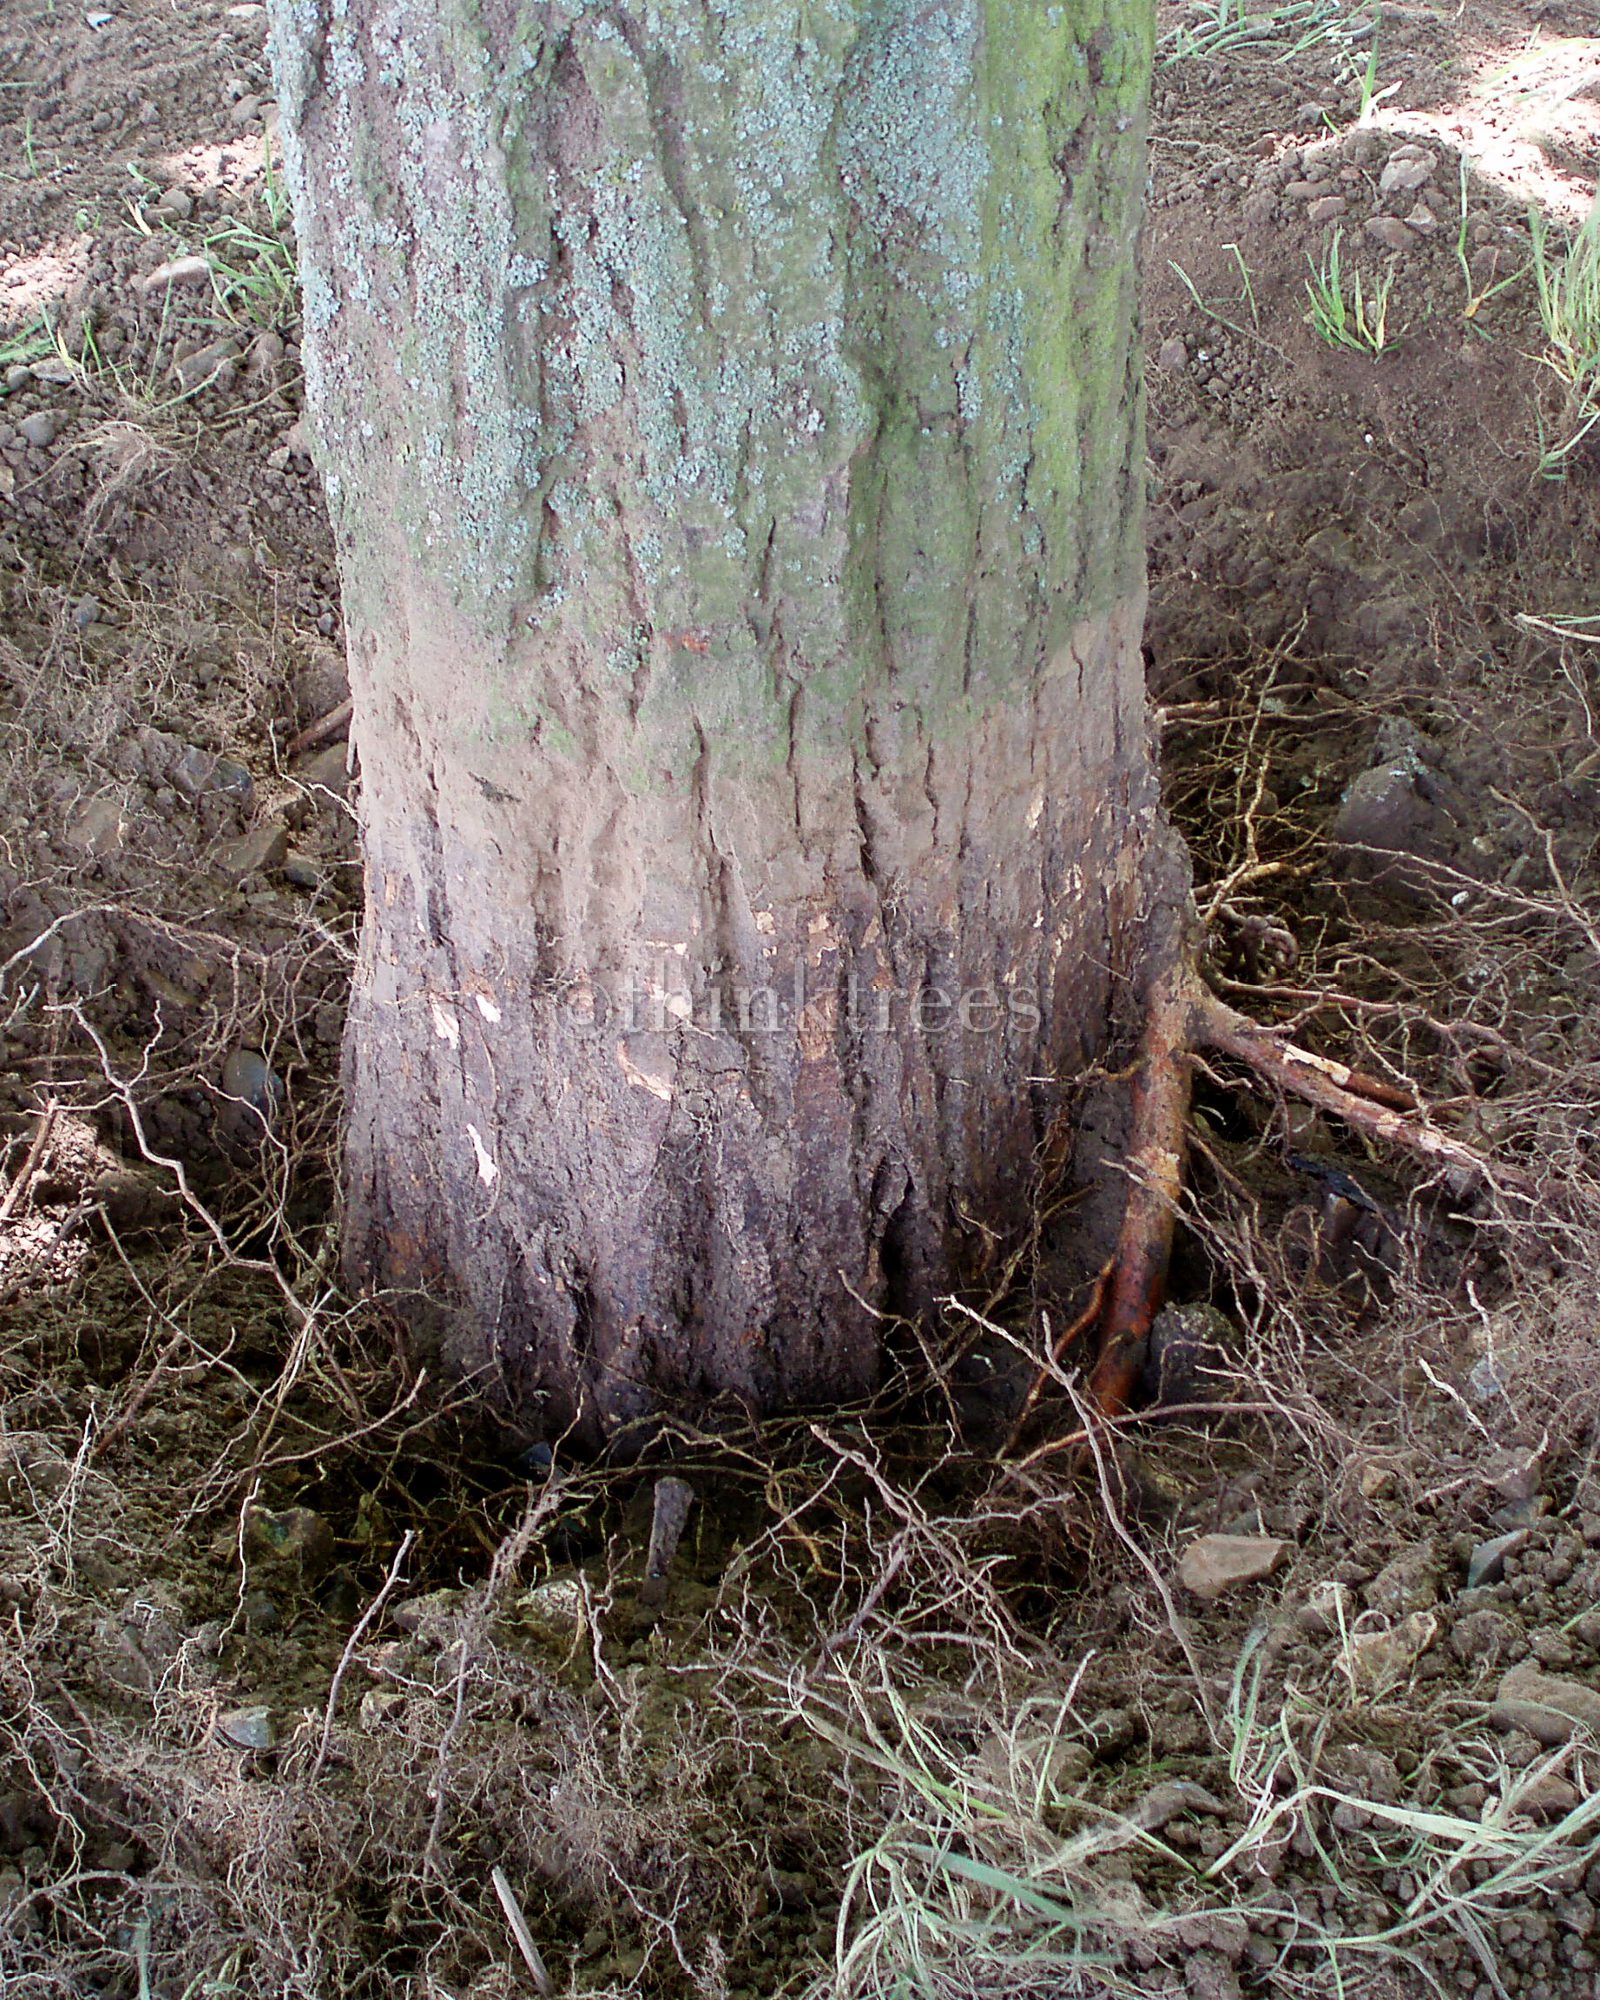 The result of root collar excavation carried out on a lime tree that had the soil level raised around the base detail